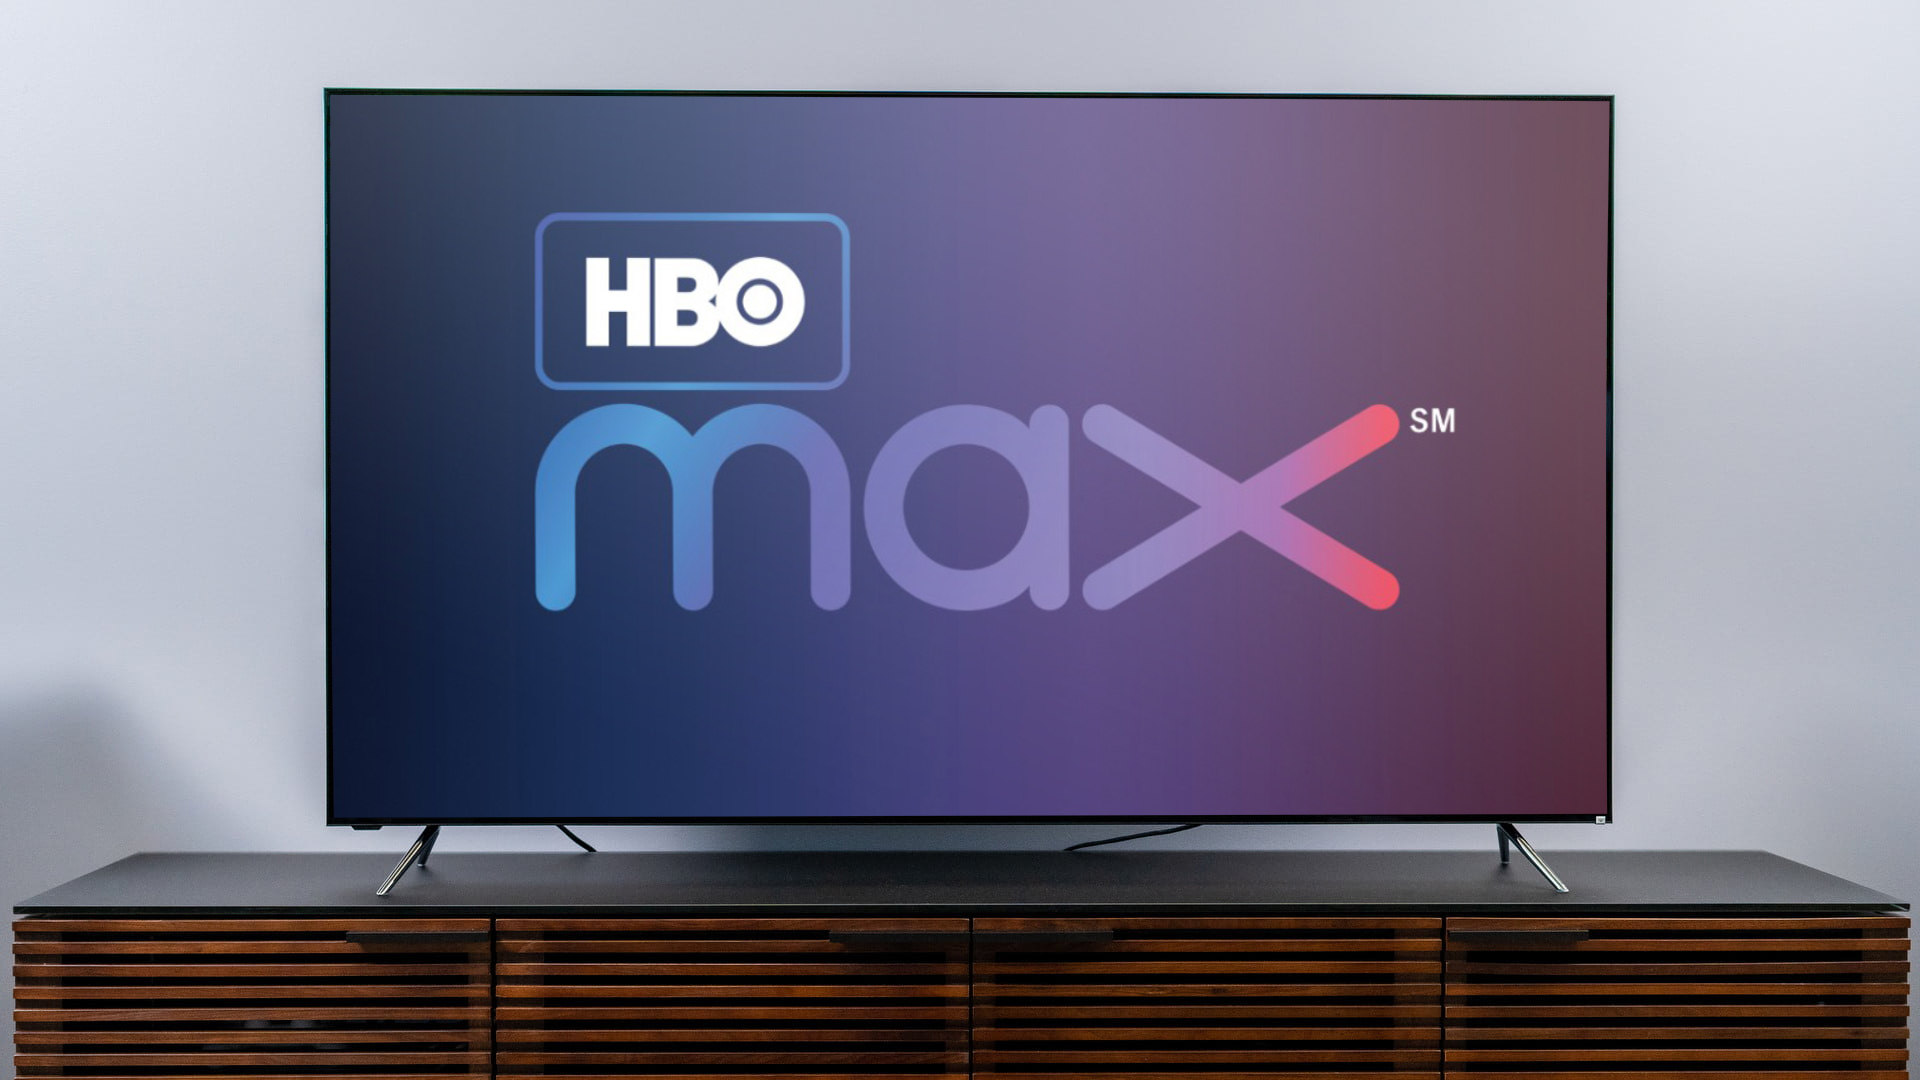 HBO Max app just had one of its best quarters to date, but app performance  still has room to improve